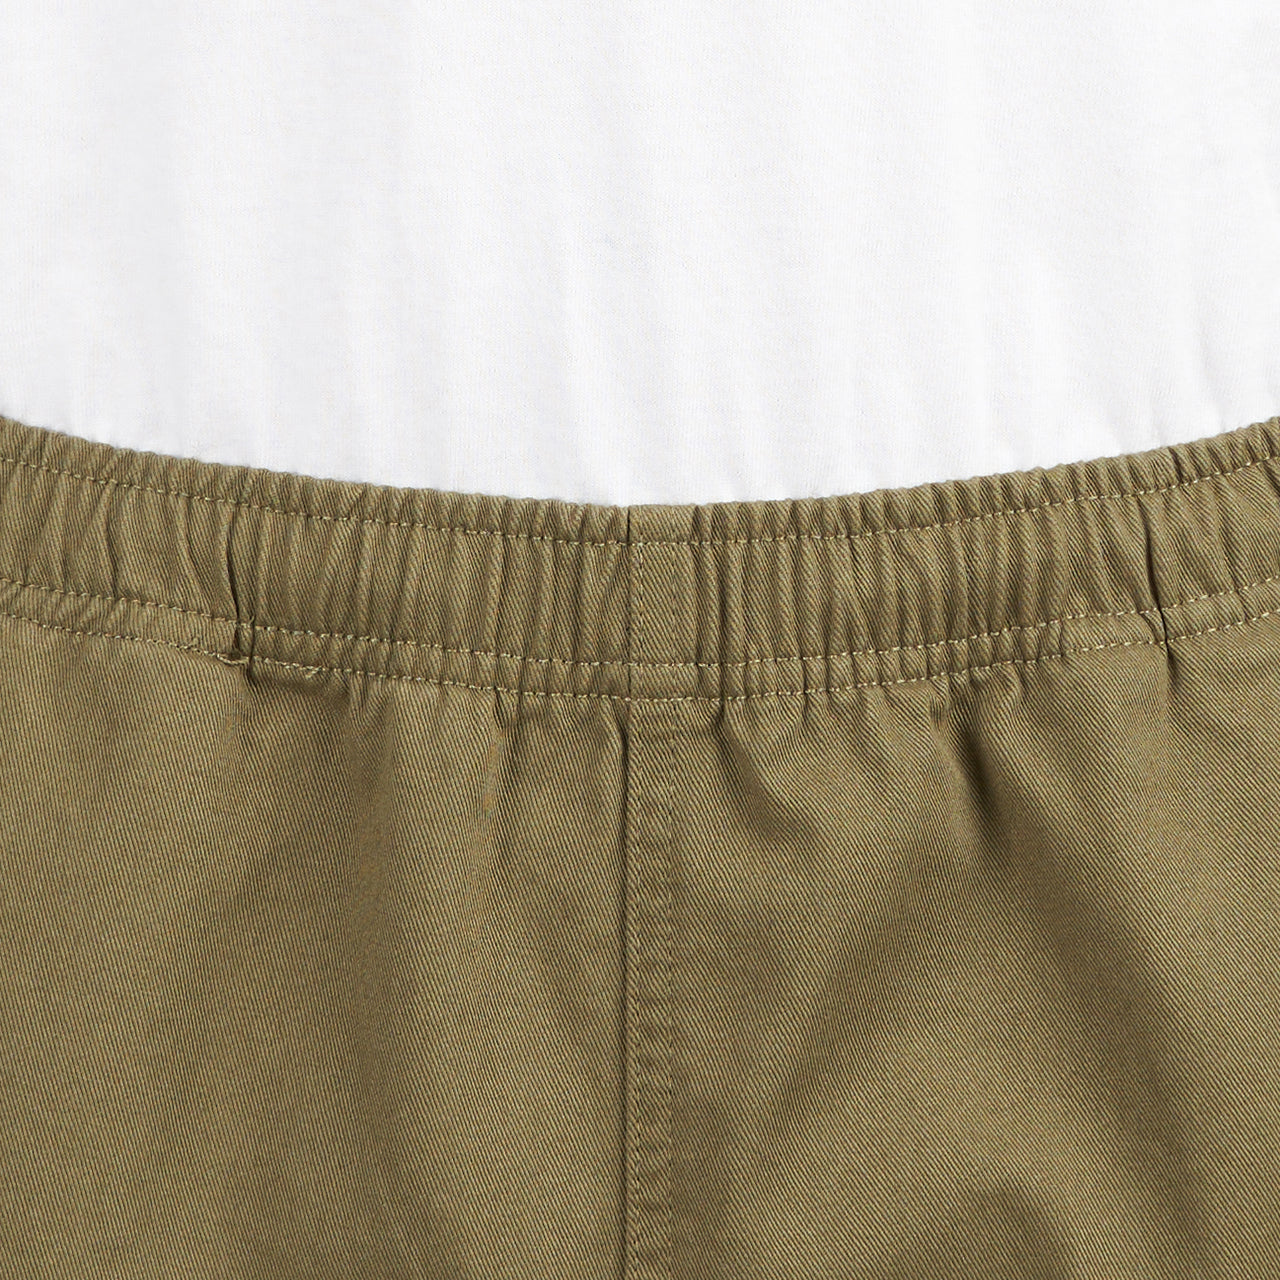 Obey Easy Relaxed Twill Short (Grün)  - Allike Store